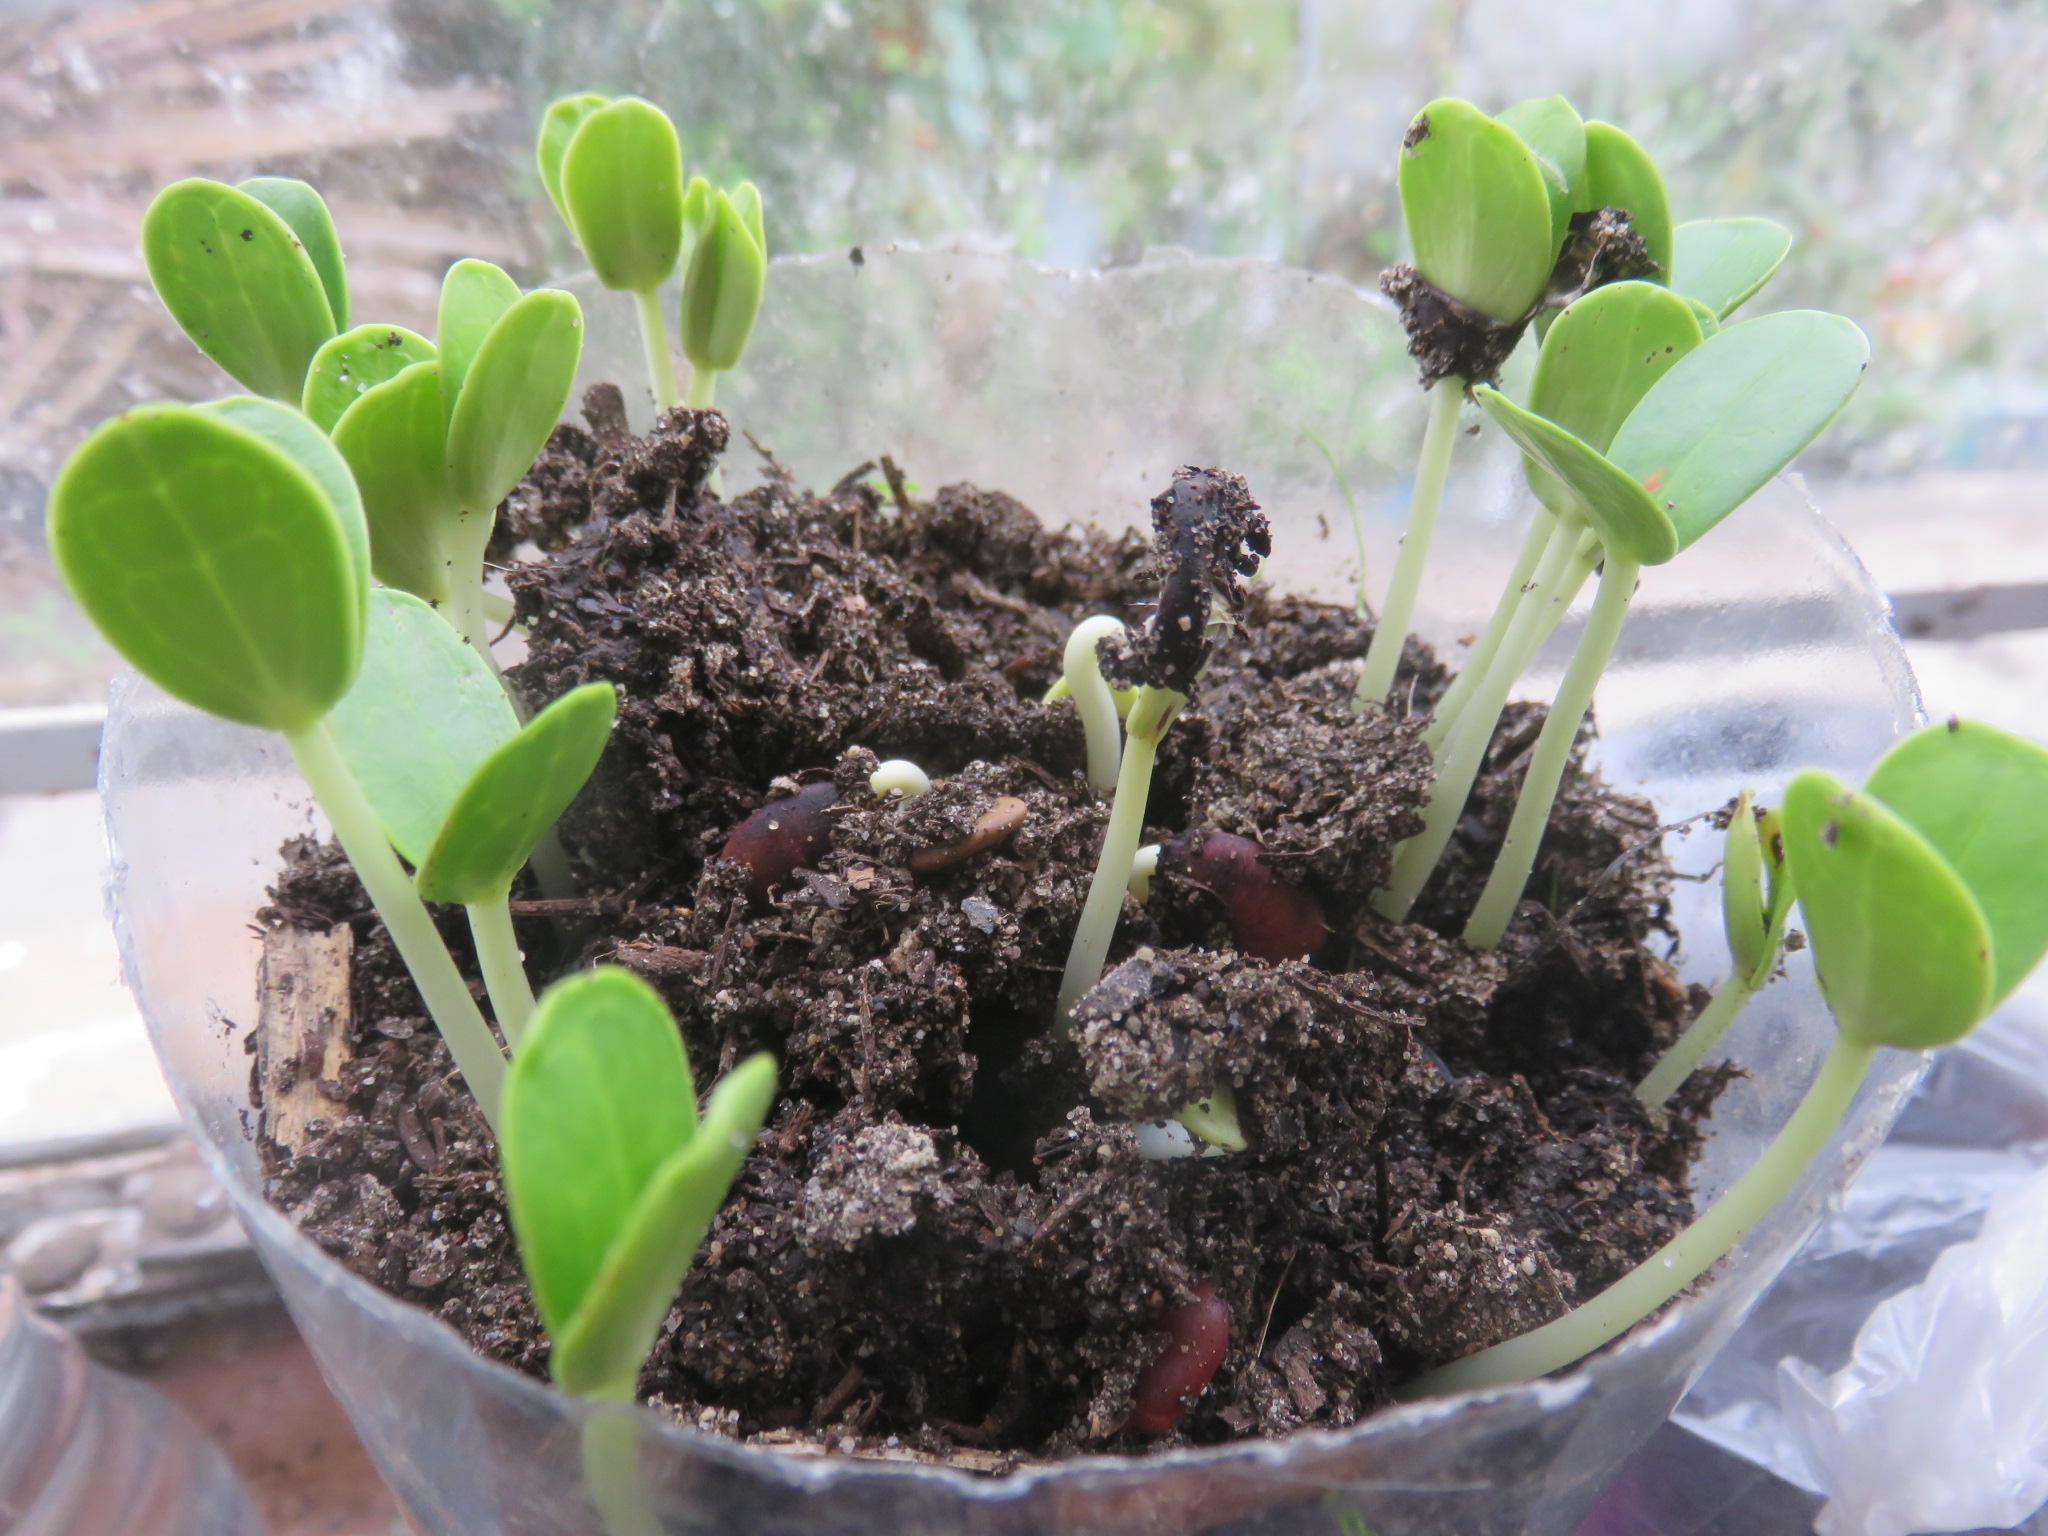 Carob seed can take just 2 weeks to germinate